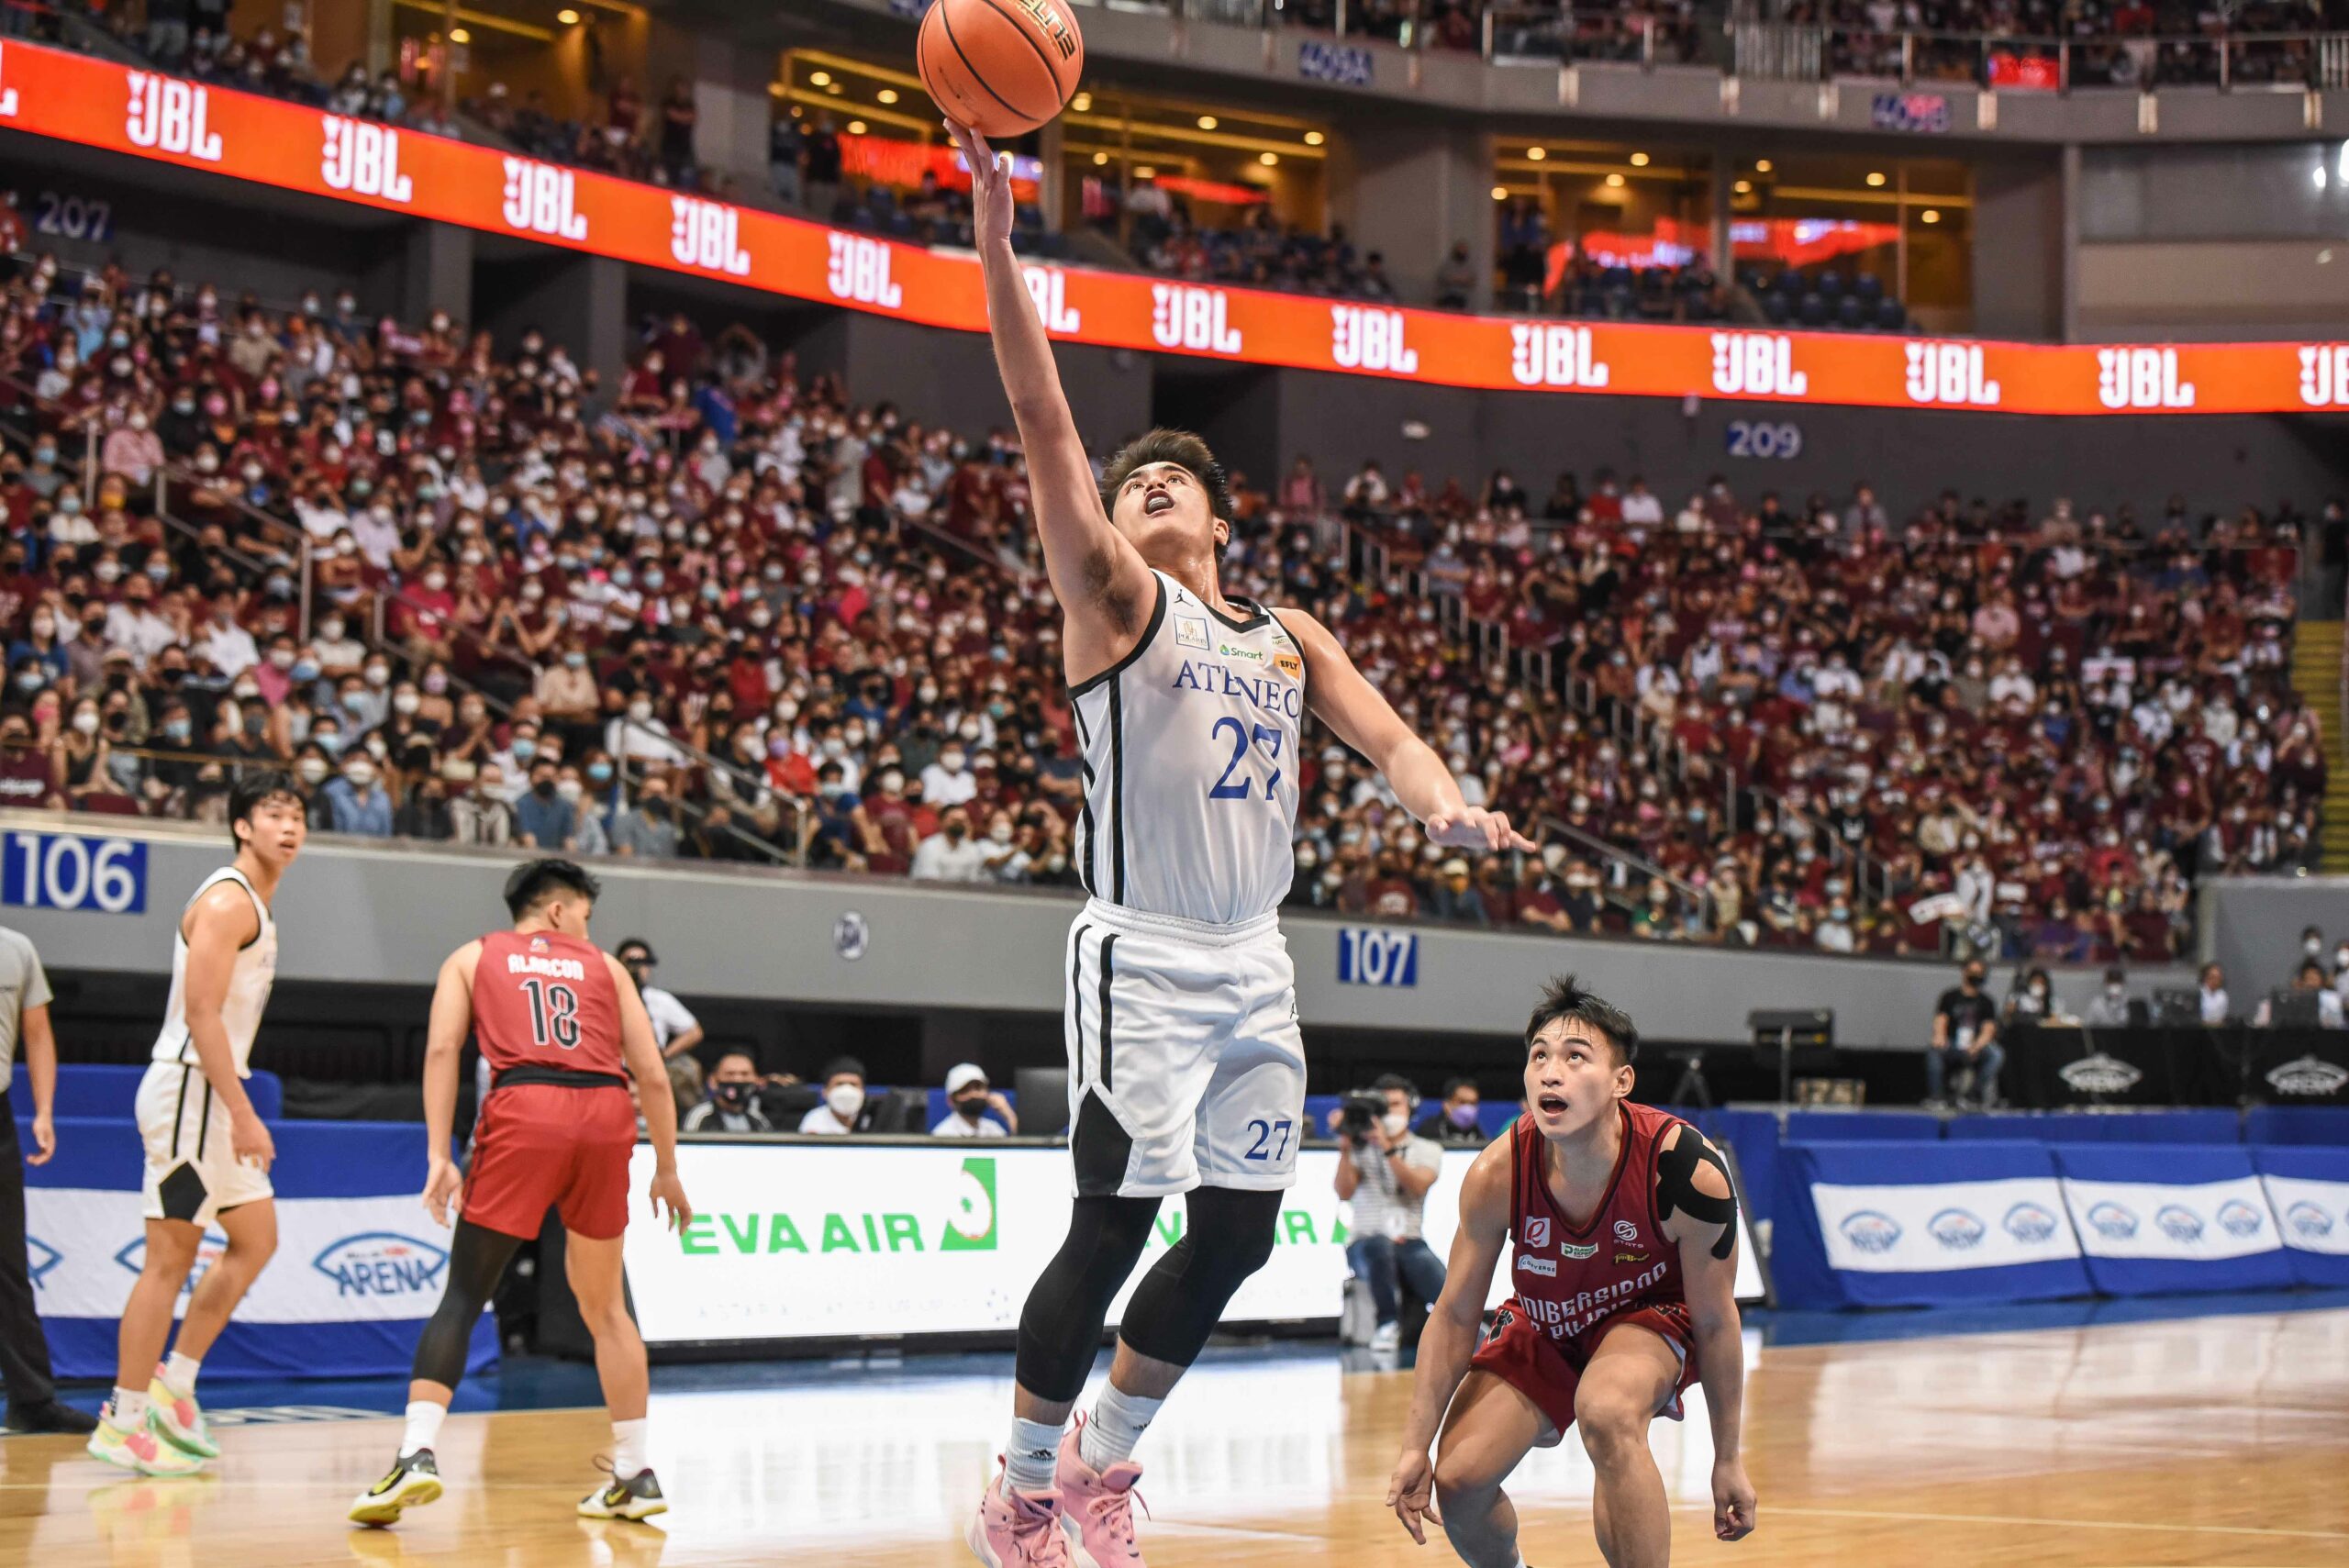 UAAP-84-Mens-Basketball-Ateneo-vs-UP-SJ-Belangel-scaled SJ Belangel forgoes last two years with Ateneo, to turn pro in KBL ADMU Basketball News UAAP  - philippine sports news